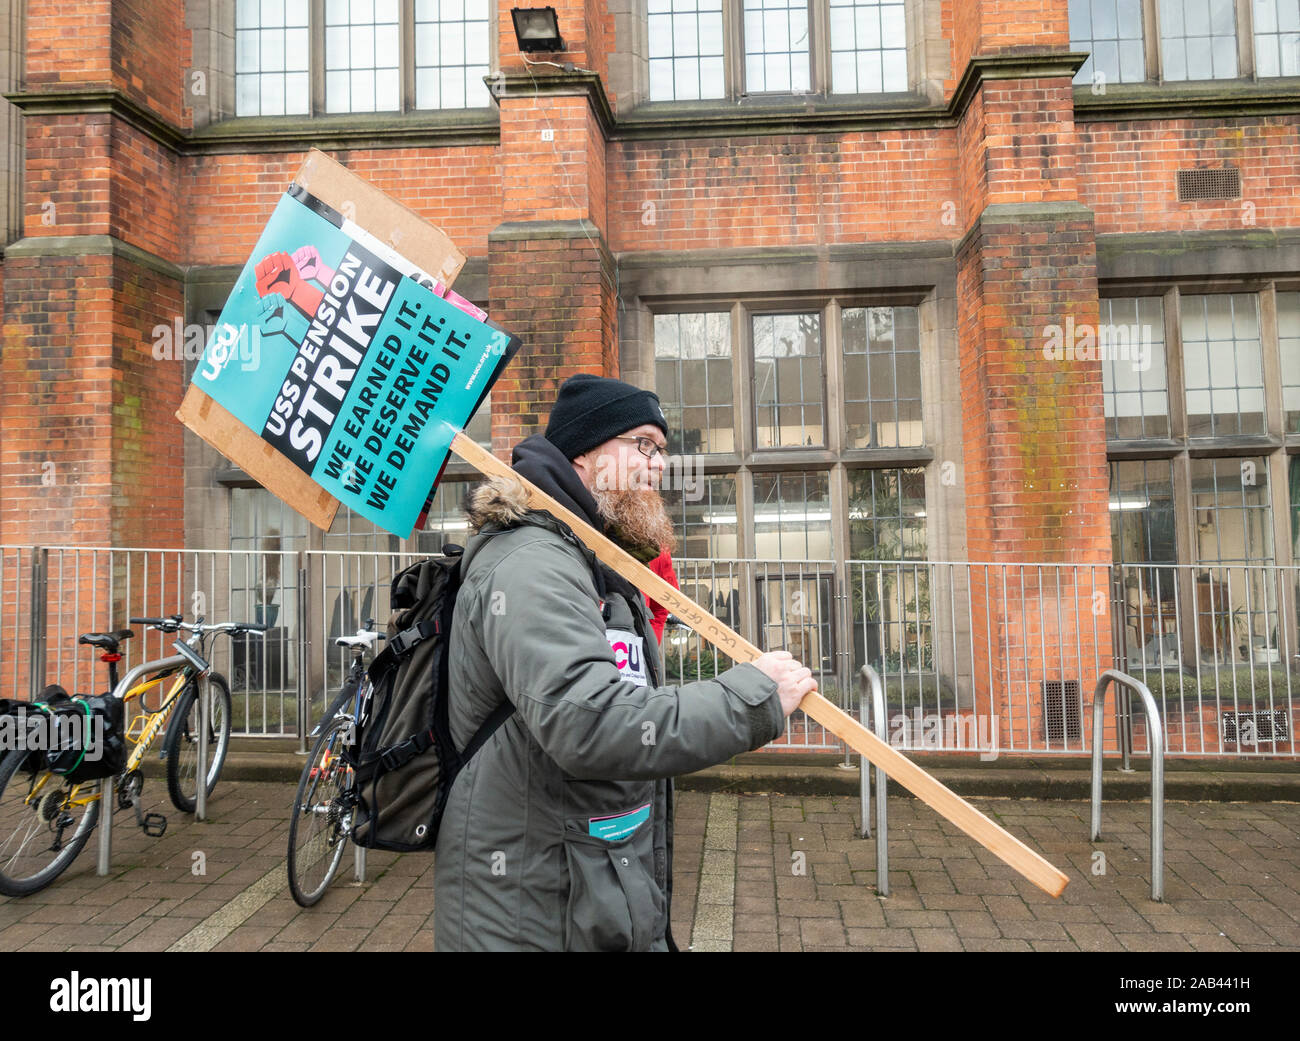 Newcastle upon Tyne, England, UK. 25th November, 2019. Academics protesting outside Newcastle university as lectures and staff in 60 universities across the UK take industrial action over pay, pensions and conditions. Credit: Alan Dawson /Alamy Live News Stock Photo